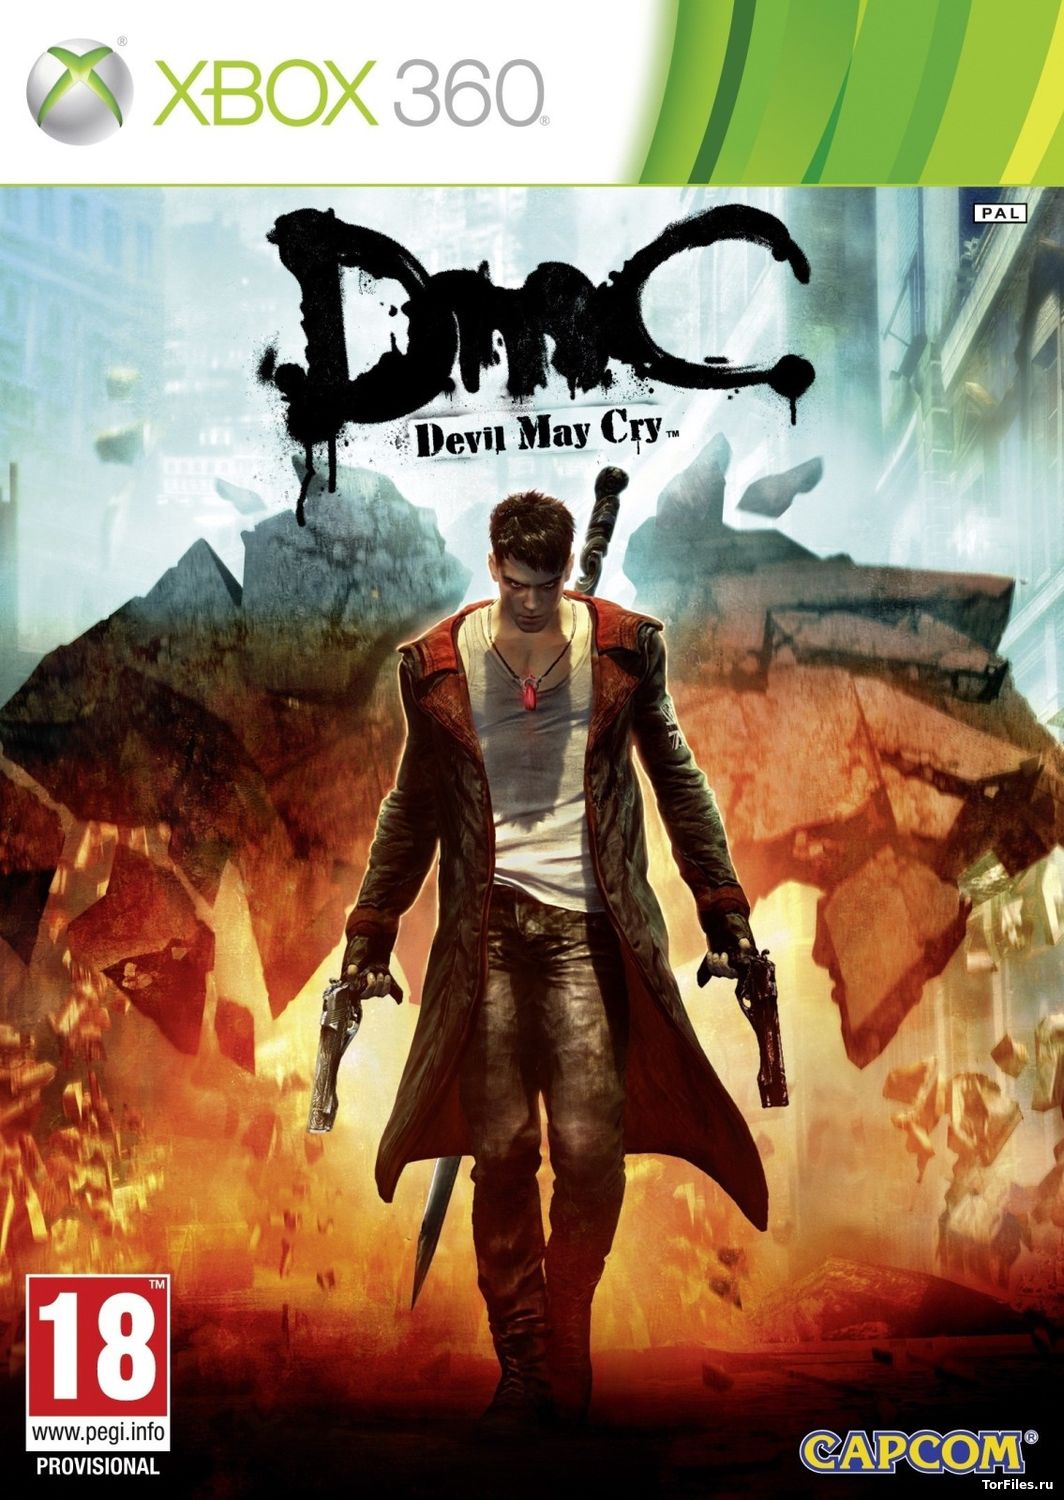 [FREEBOOT] Devil May Cry Complete Edition [RUSSOUND]